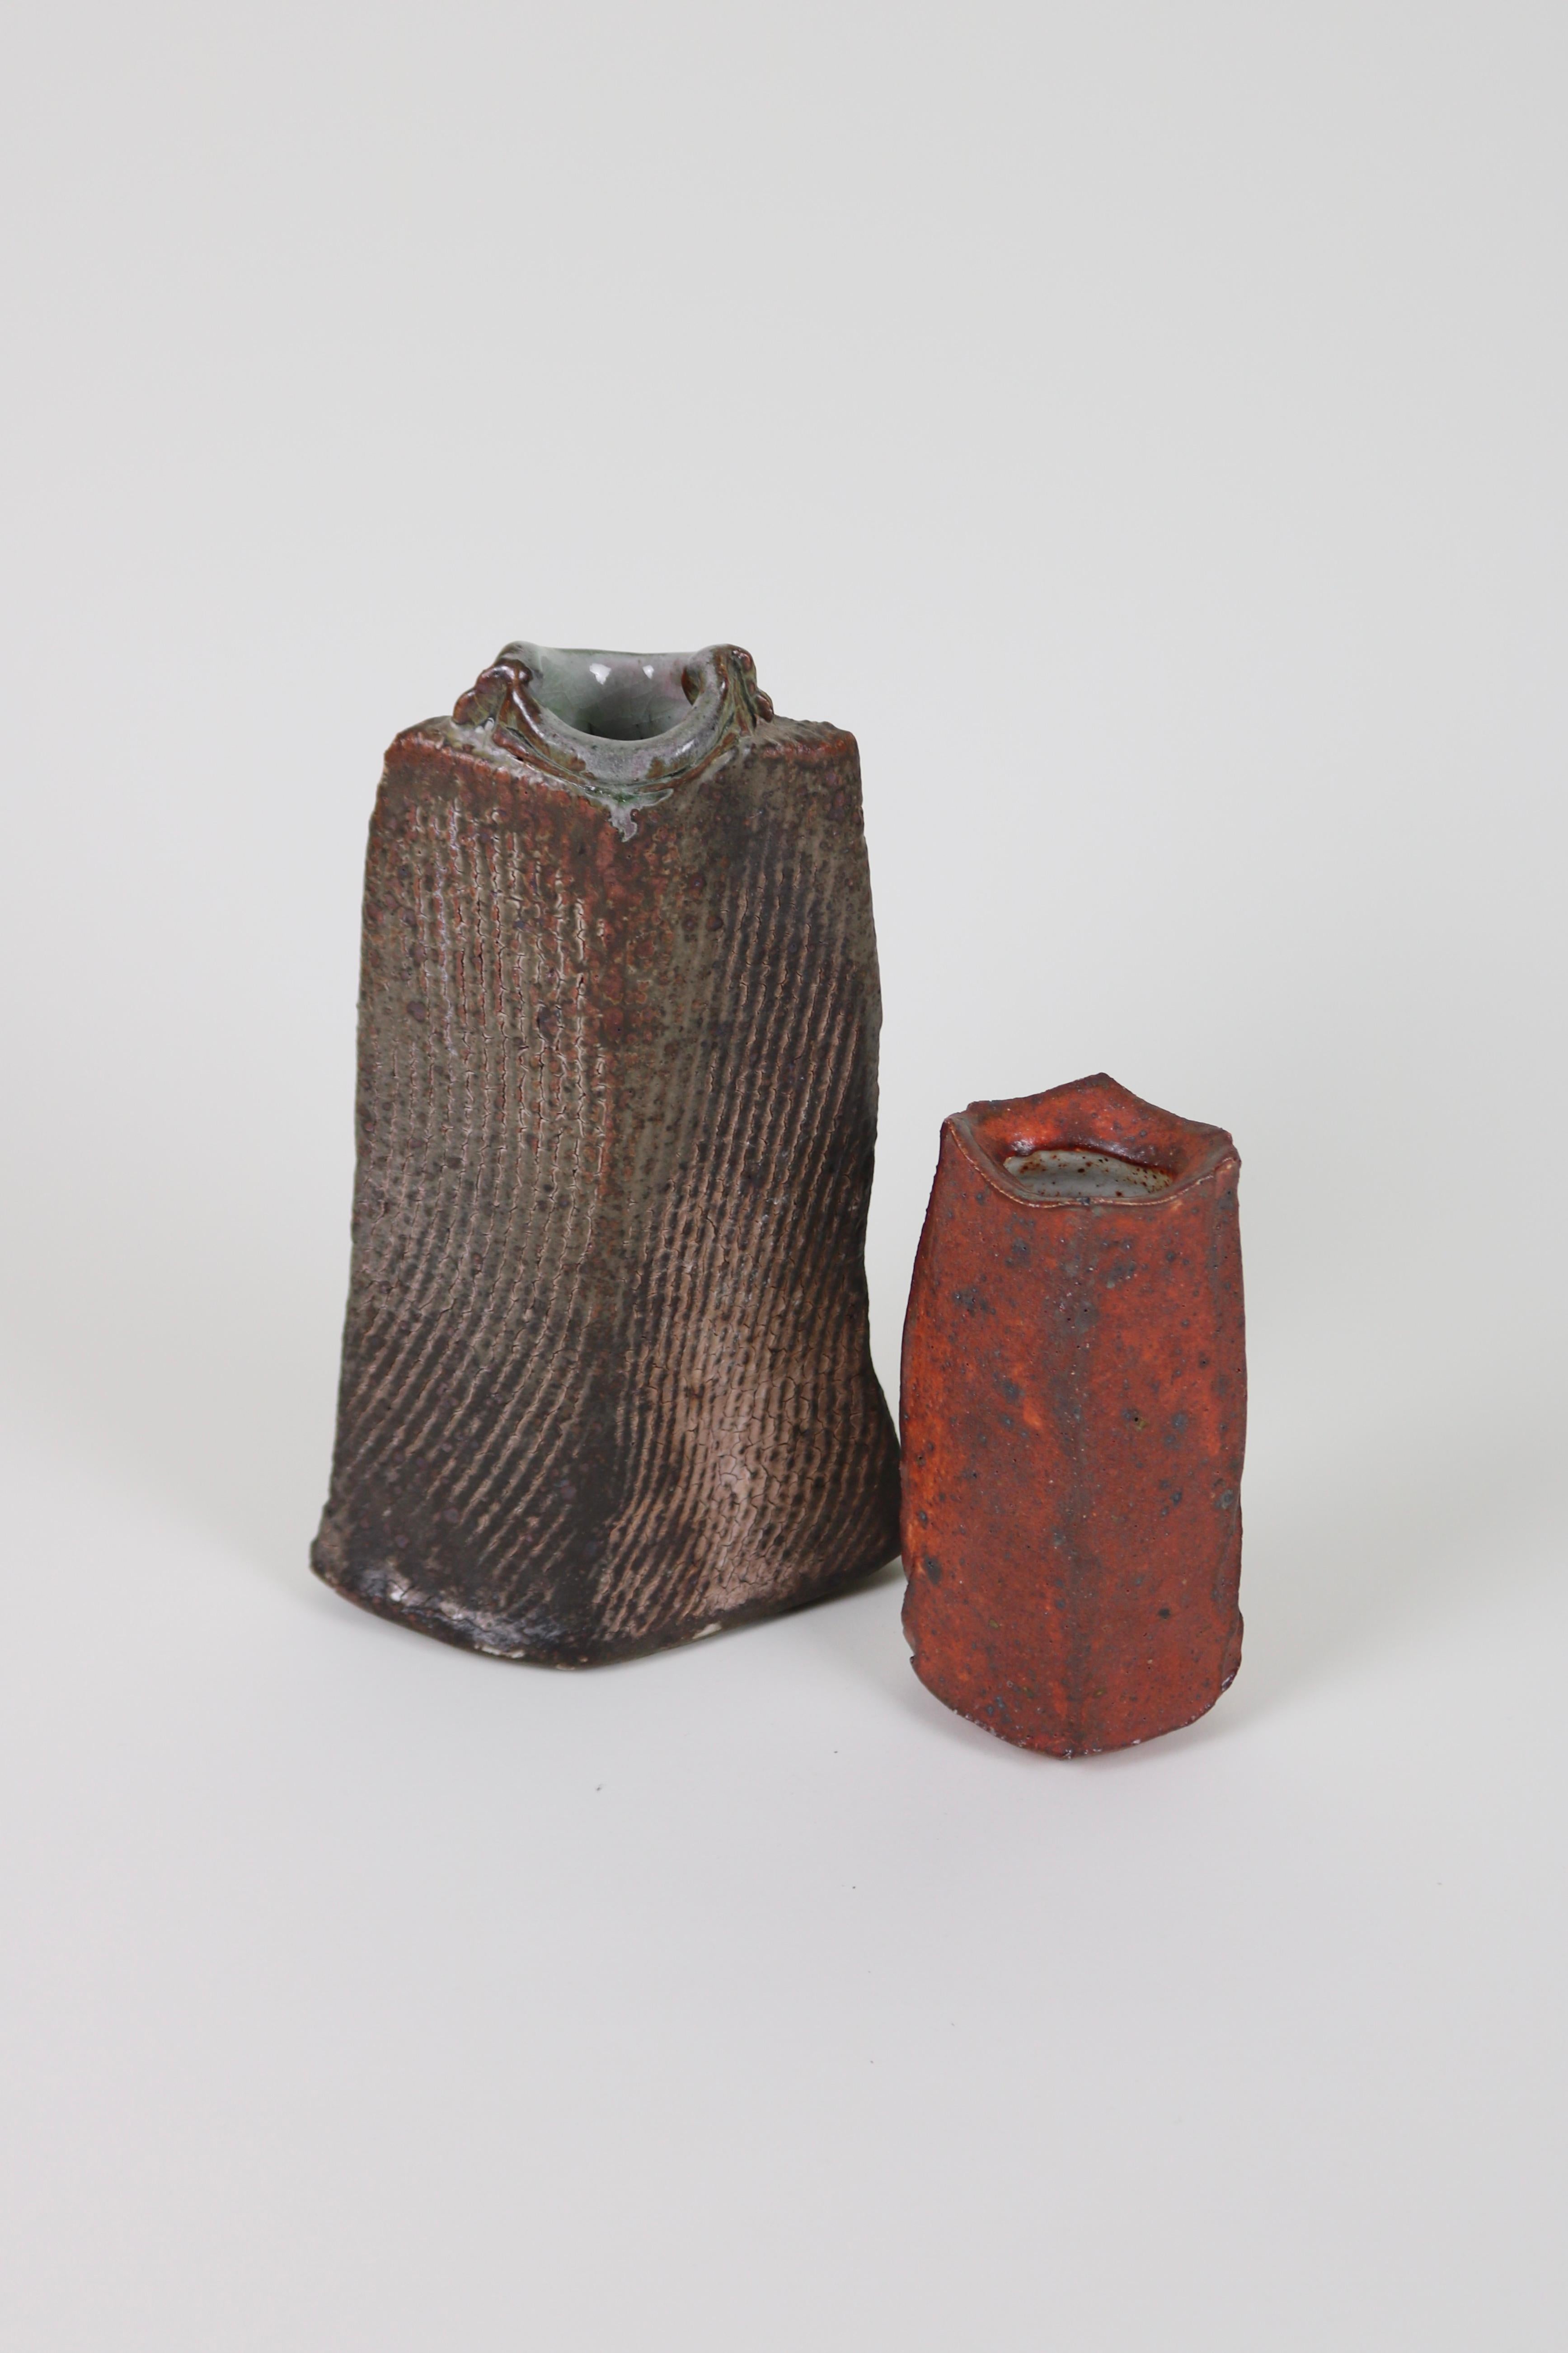 A vase from Greek-born artist Katerina Evangelidou. A wood-fired stoneware bottle form with a textured surface covered in ash glaze.

Evangelidou creates beautifully organic forms. Her process always begins on the wheel, with flattening and